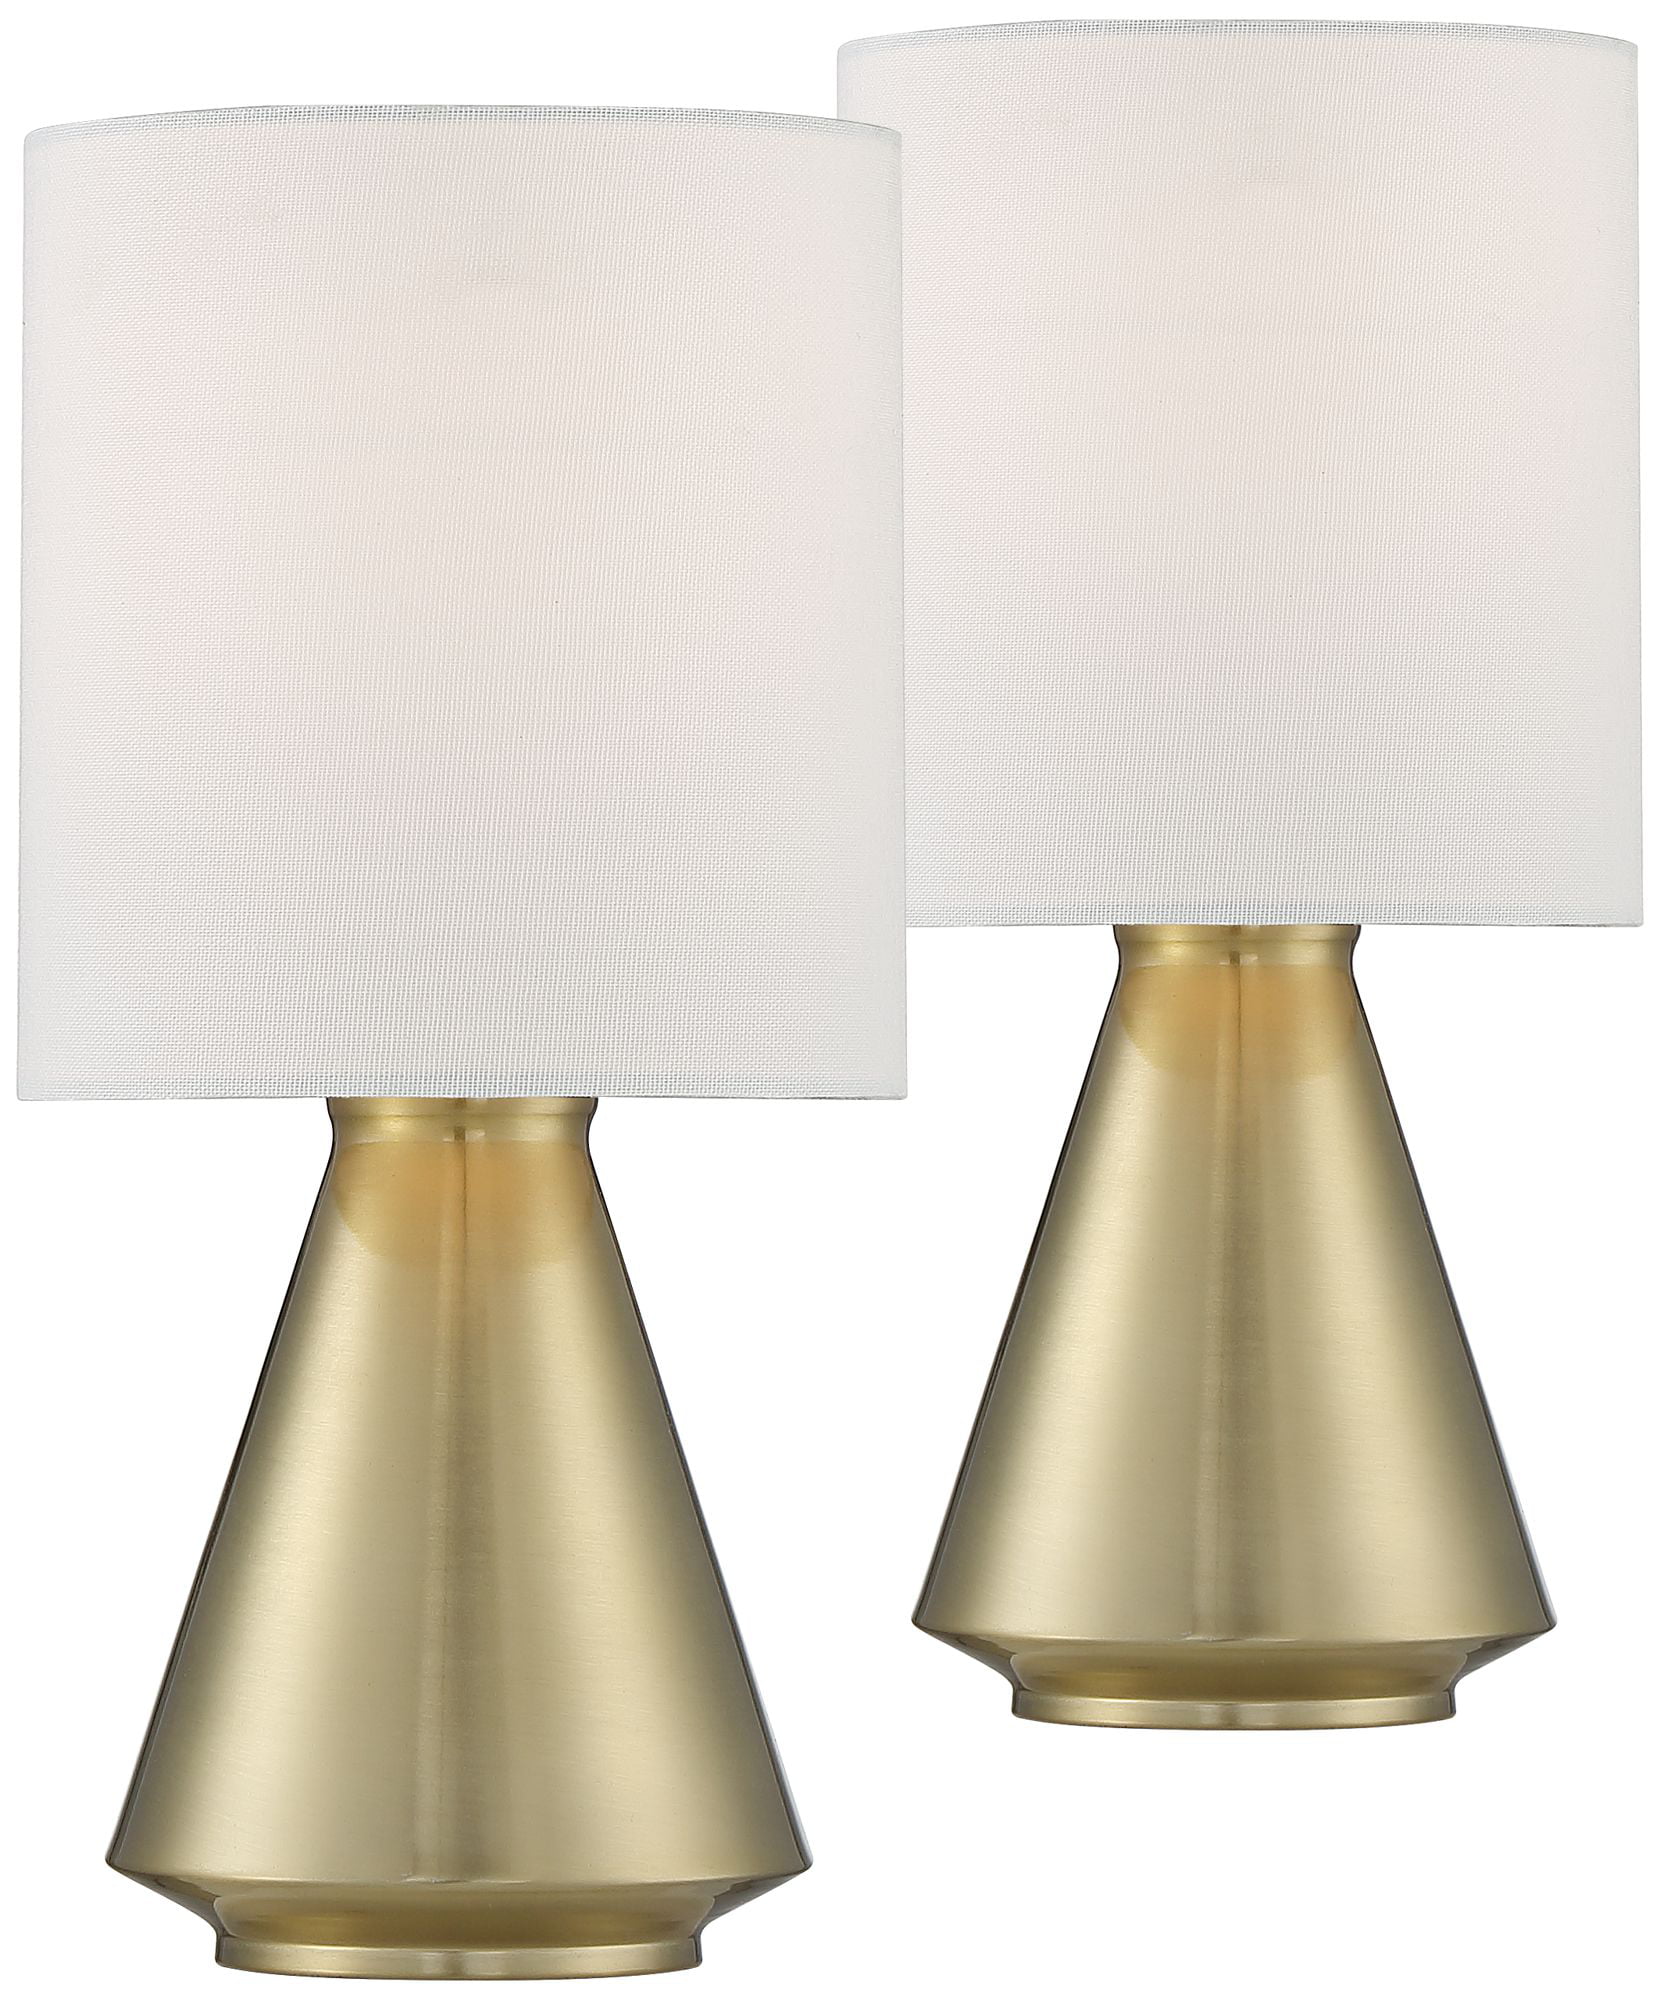 High Brass Accent Table Lamps Set, Habitat Maya Set Of 2 Touch Base Table Lamps